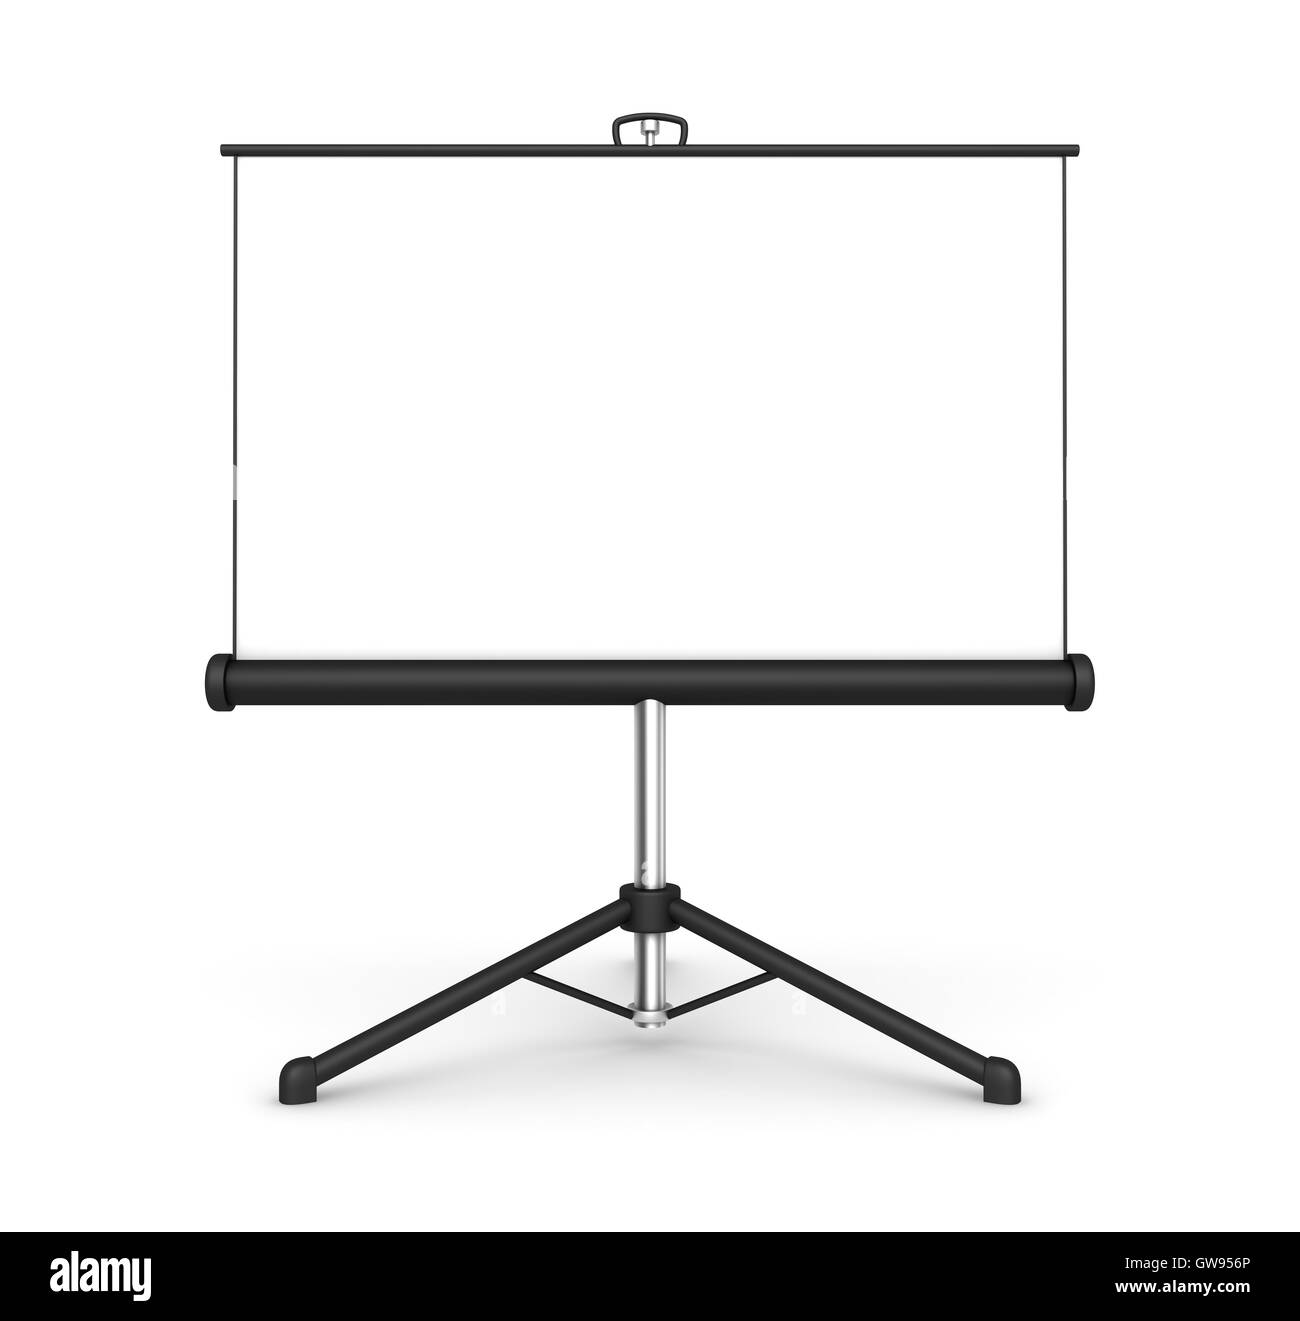 projection screen  3d illustration Stock Photo